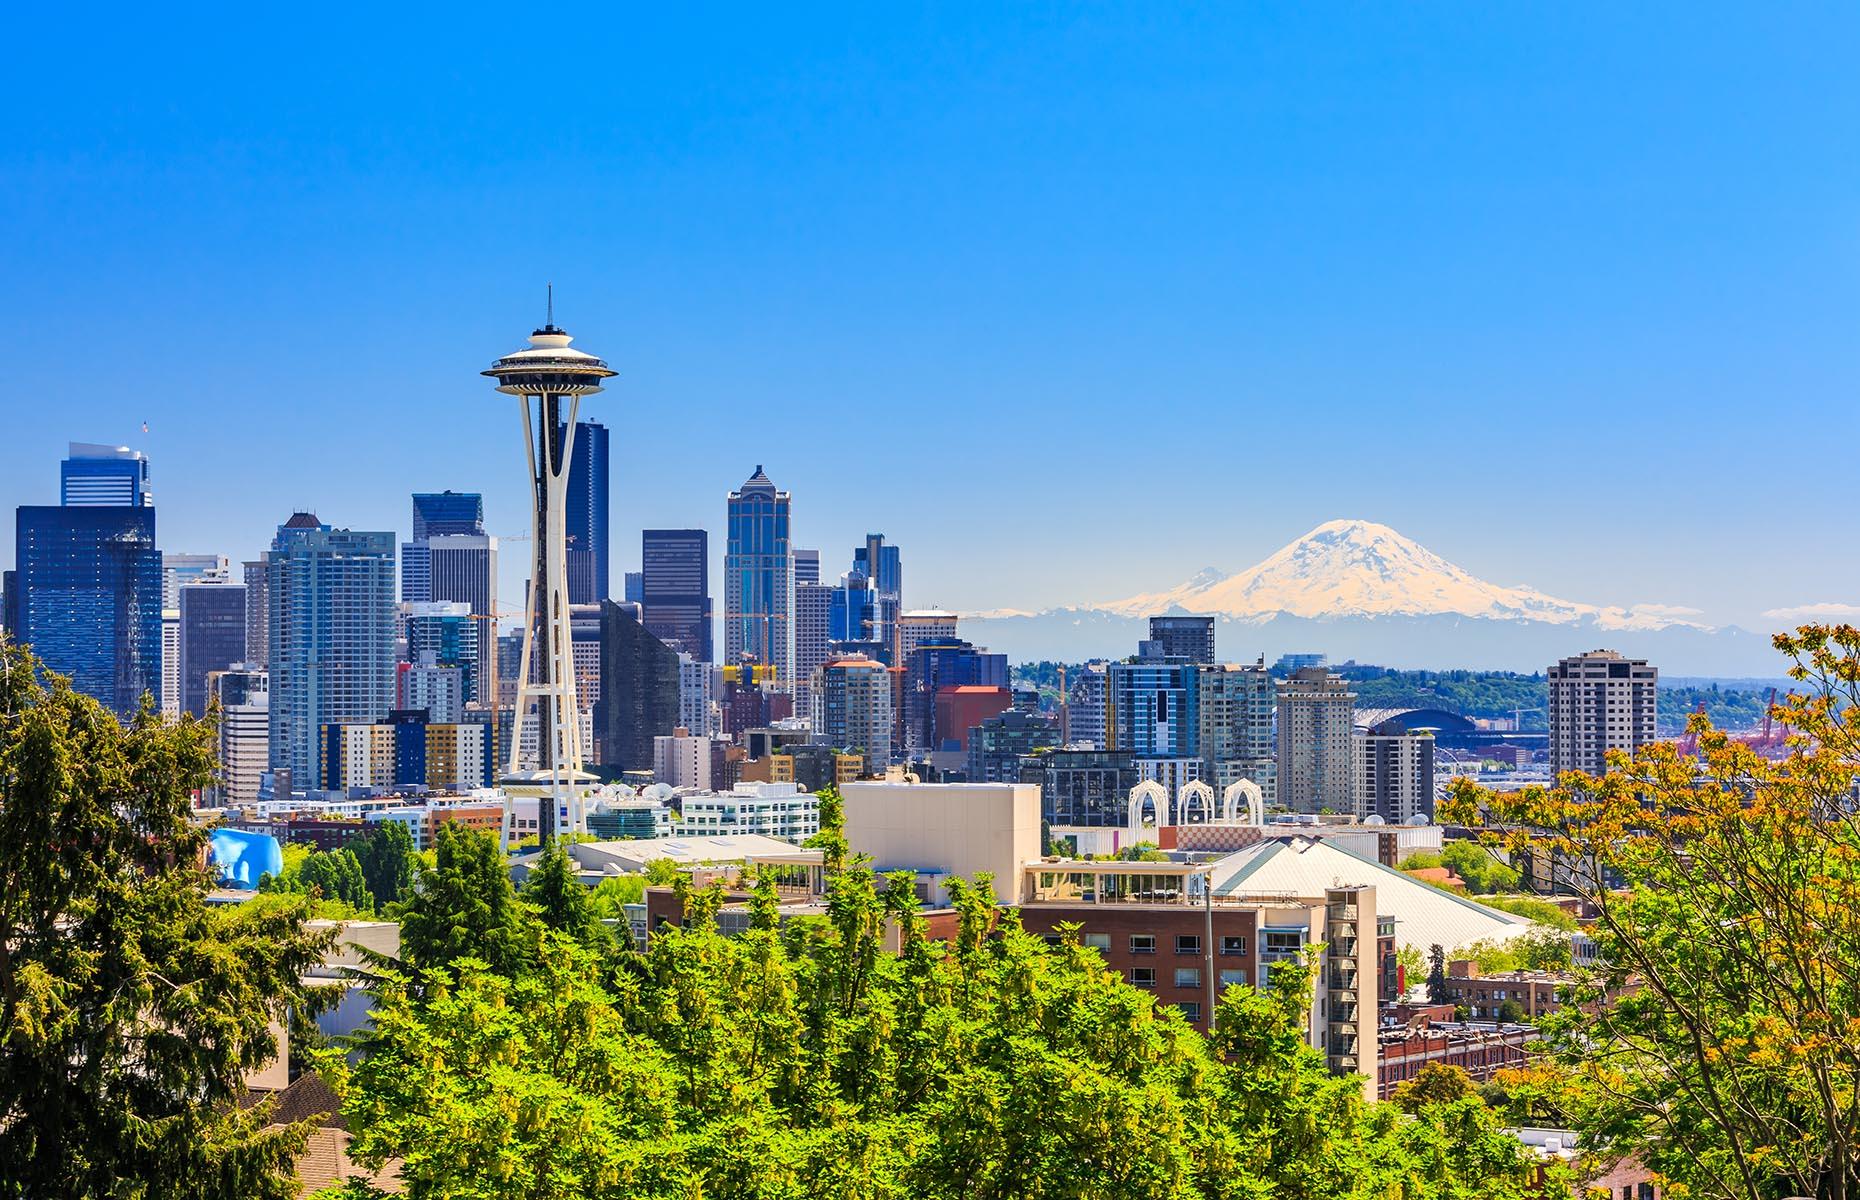 <p>In <a href="https://www.loveexploring.com/guides/74956/explore-seattle-the-top-things-to-do-where-to-stay-what-to-eat">Seattle</a> you’ll already feel like you’re in nature, even in the midst of skyscrapers. But despite the natural surroundings, including forests, water and mountains, there’s still a distinctly urban feel to the city with its innovative tech scene, a walkable waterfront full of shops and restaurants, and plenty of attractions. One highlight is the Seattle Center, where you’ll find the distinctive <a href="https://www.spaceneedle.com/">Space Needle</a> and <a href="https://www.mopop.org/">Museum of Pop Culture</a> (expected to reopen soon). You can <a href="https://visitseattle.org/">check the latest travel information here</a>.</p>